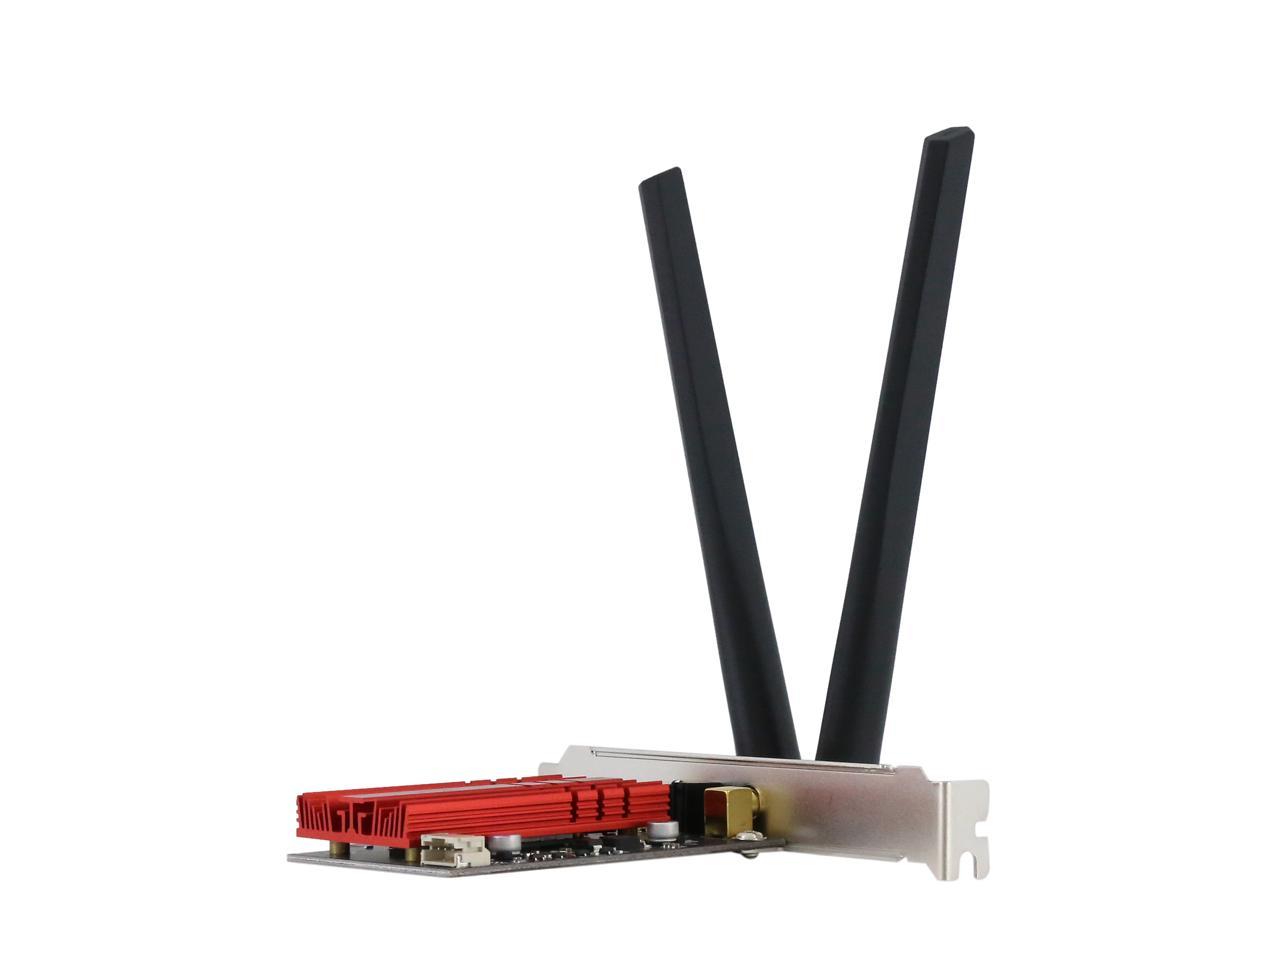 2.4Ghz 300Mbps+ 5Ghz 867Mbps Including Low-Profile Bracket 802.11AC1200 Dual Band PCI-E Wireless Network Adapter Support Windows XP/7/8/8.1/10 Rosewill WiFi Adapter/Wireless Adapter/Network Card 